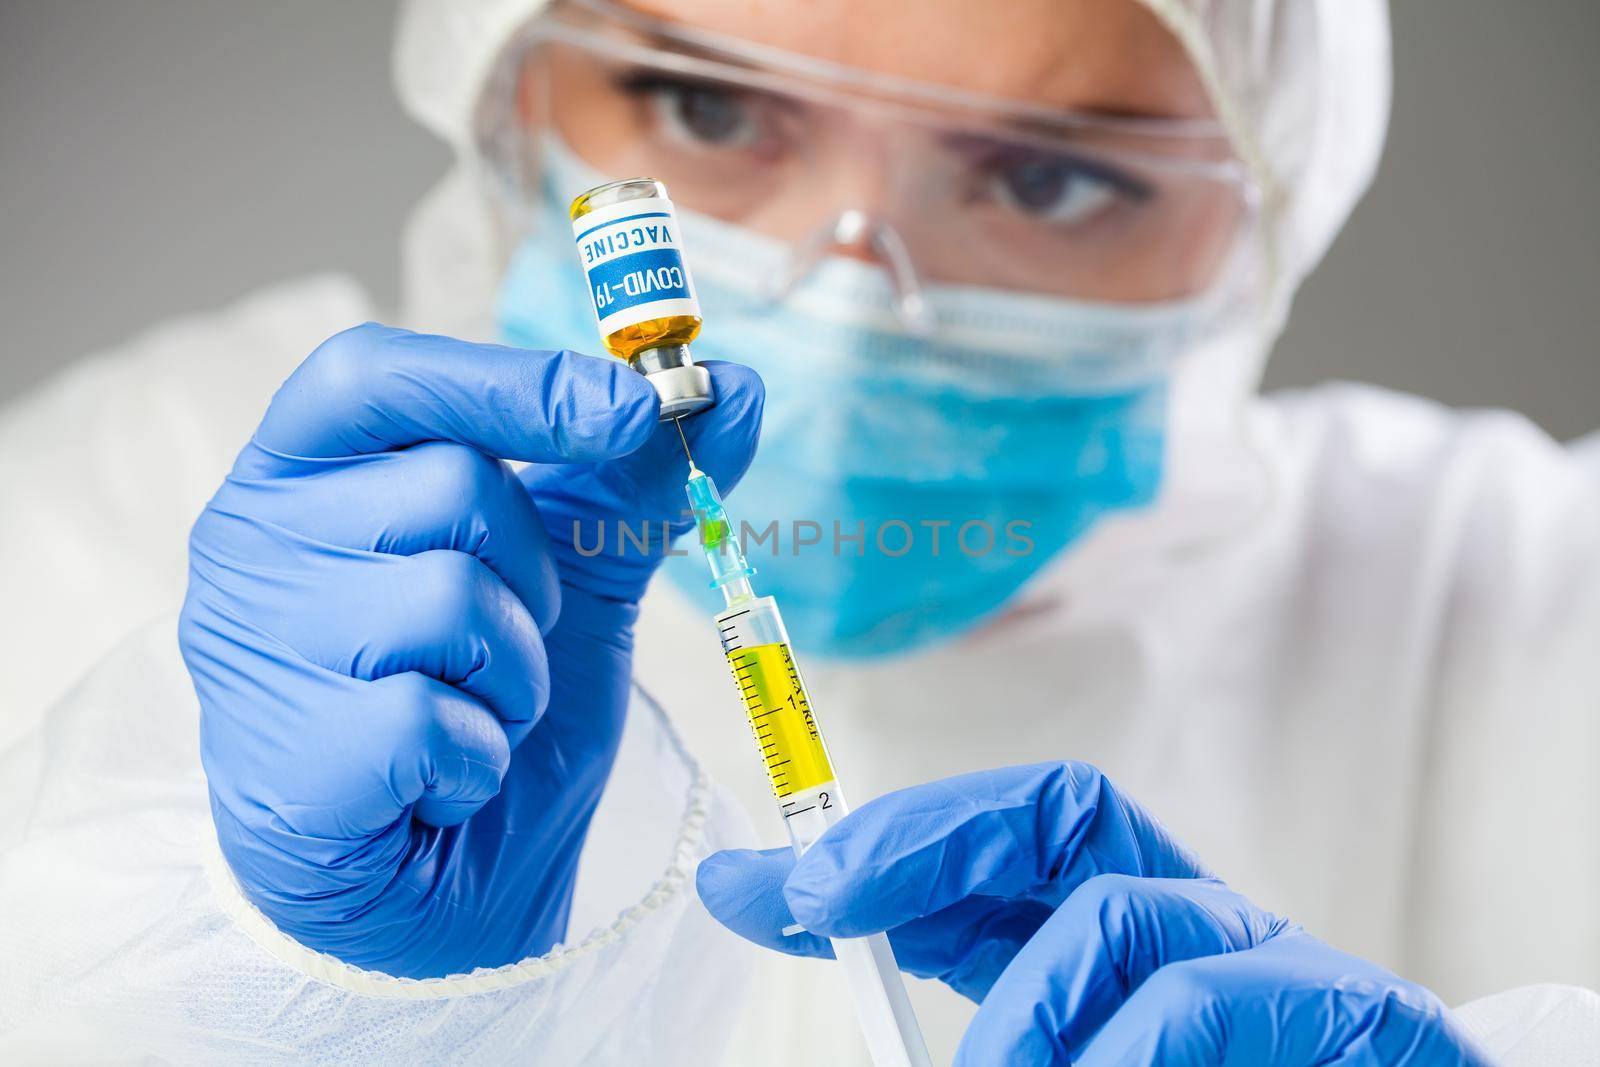 Medical scientist holding sample Coronavirus COVID-19 vaccine,injecting yellow liquid with syringe jab,global pandemic crisis,cure & treatment research,volunteer patients trial,research analysis hope